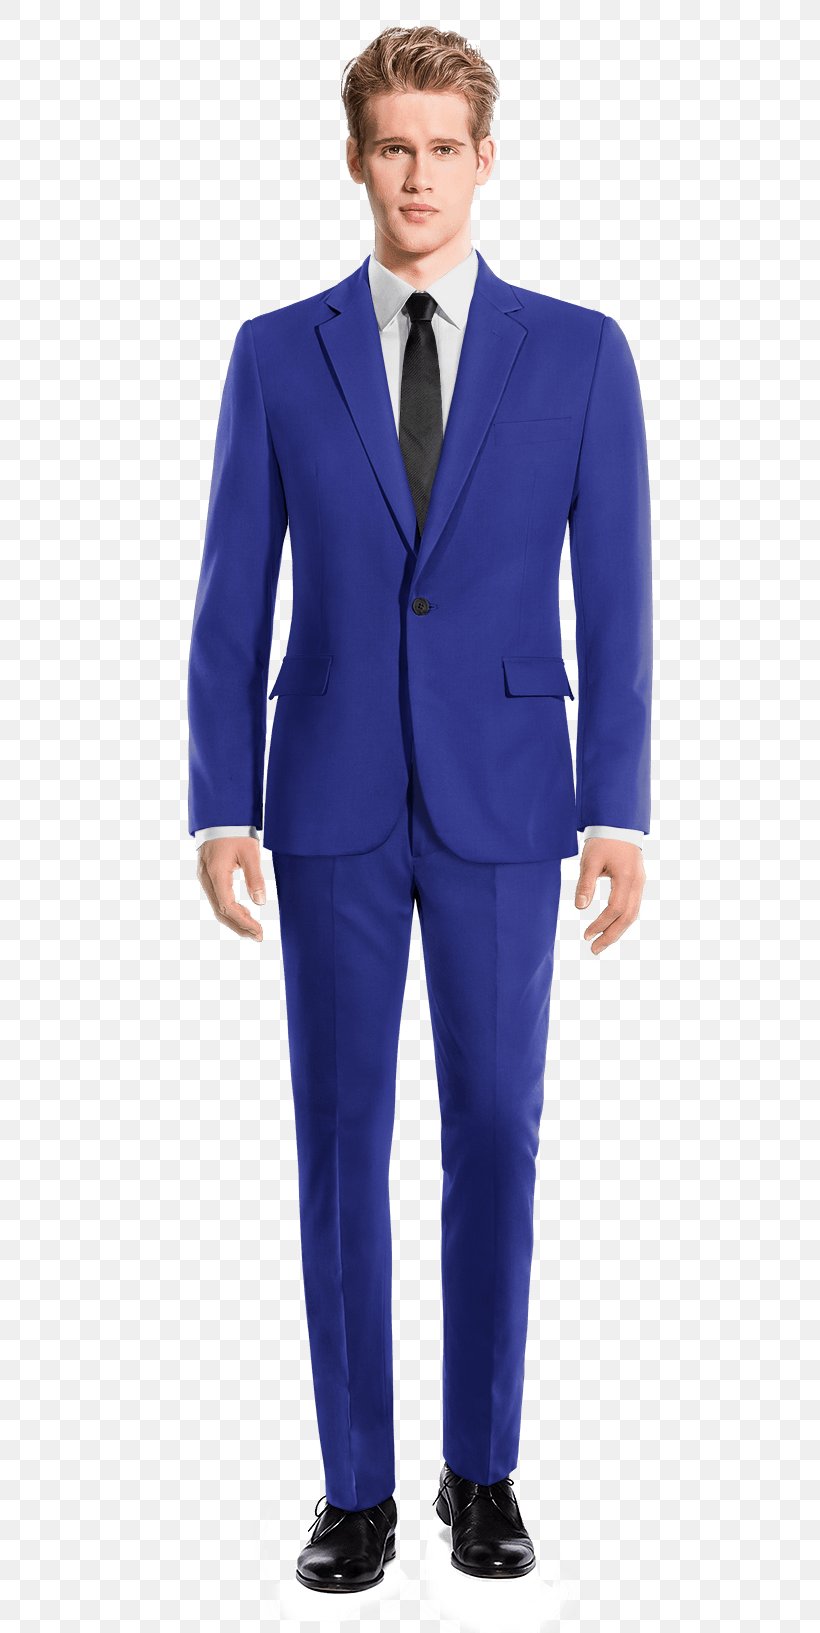 Suit Tuxedo Pants Clothing Double-breasted, PNG, 600x1633px, Suit, Black Tie, Blazer, Blue, Businessperson Download Free